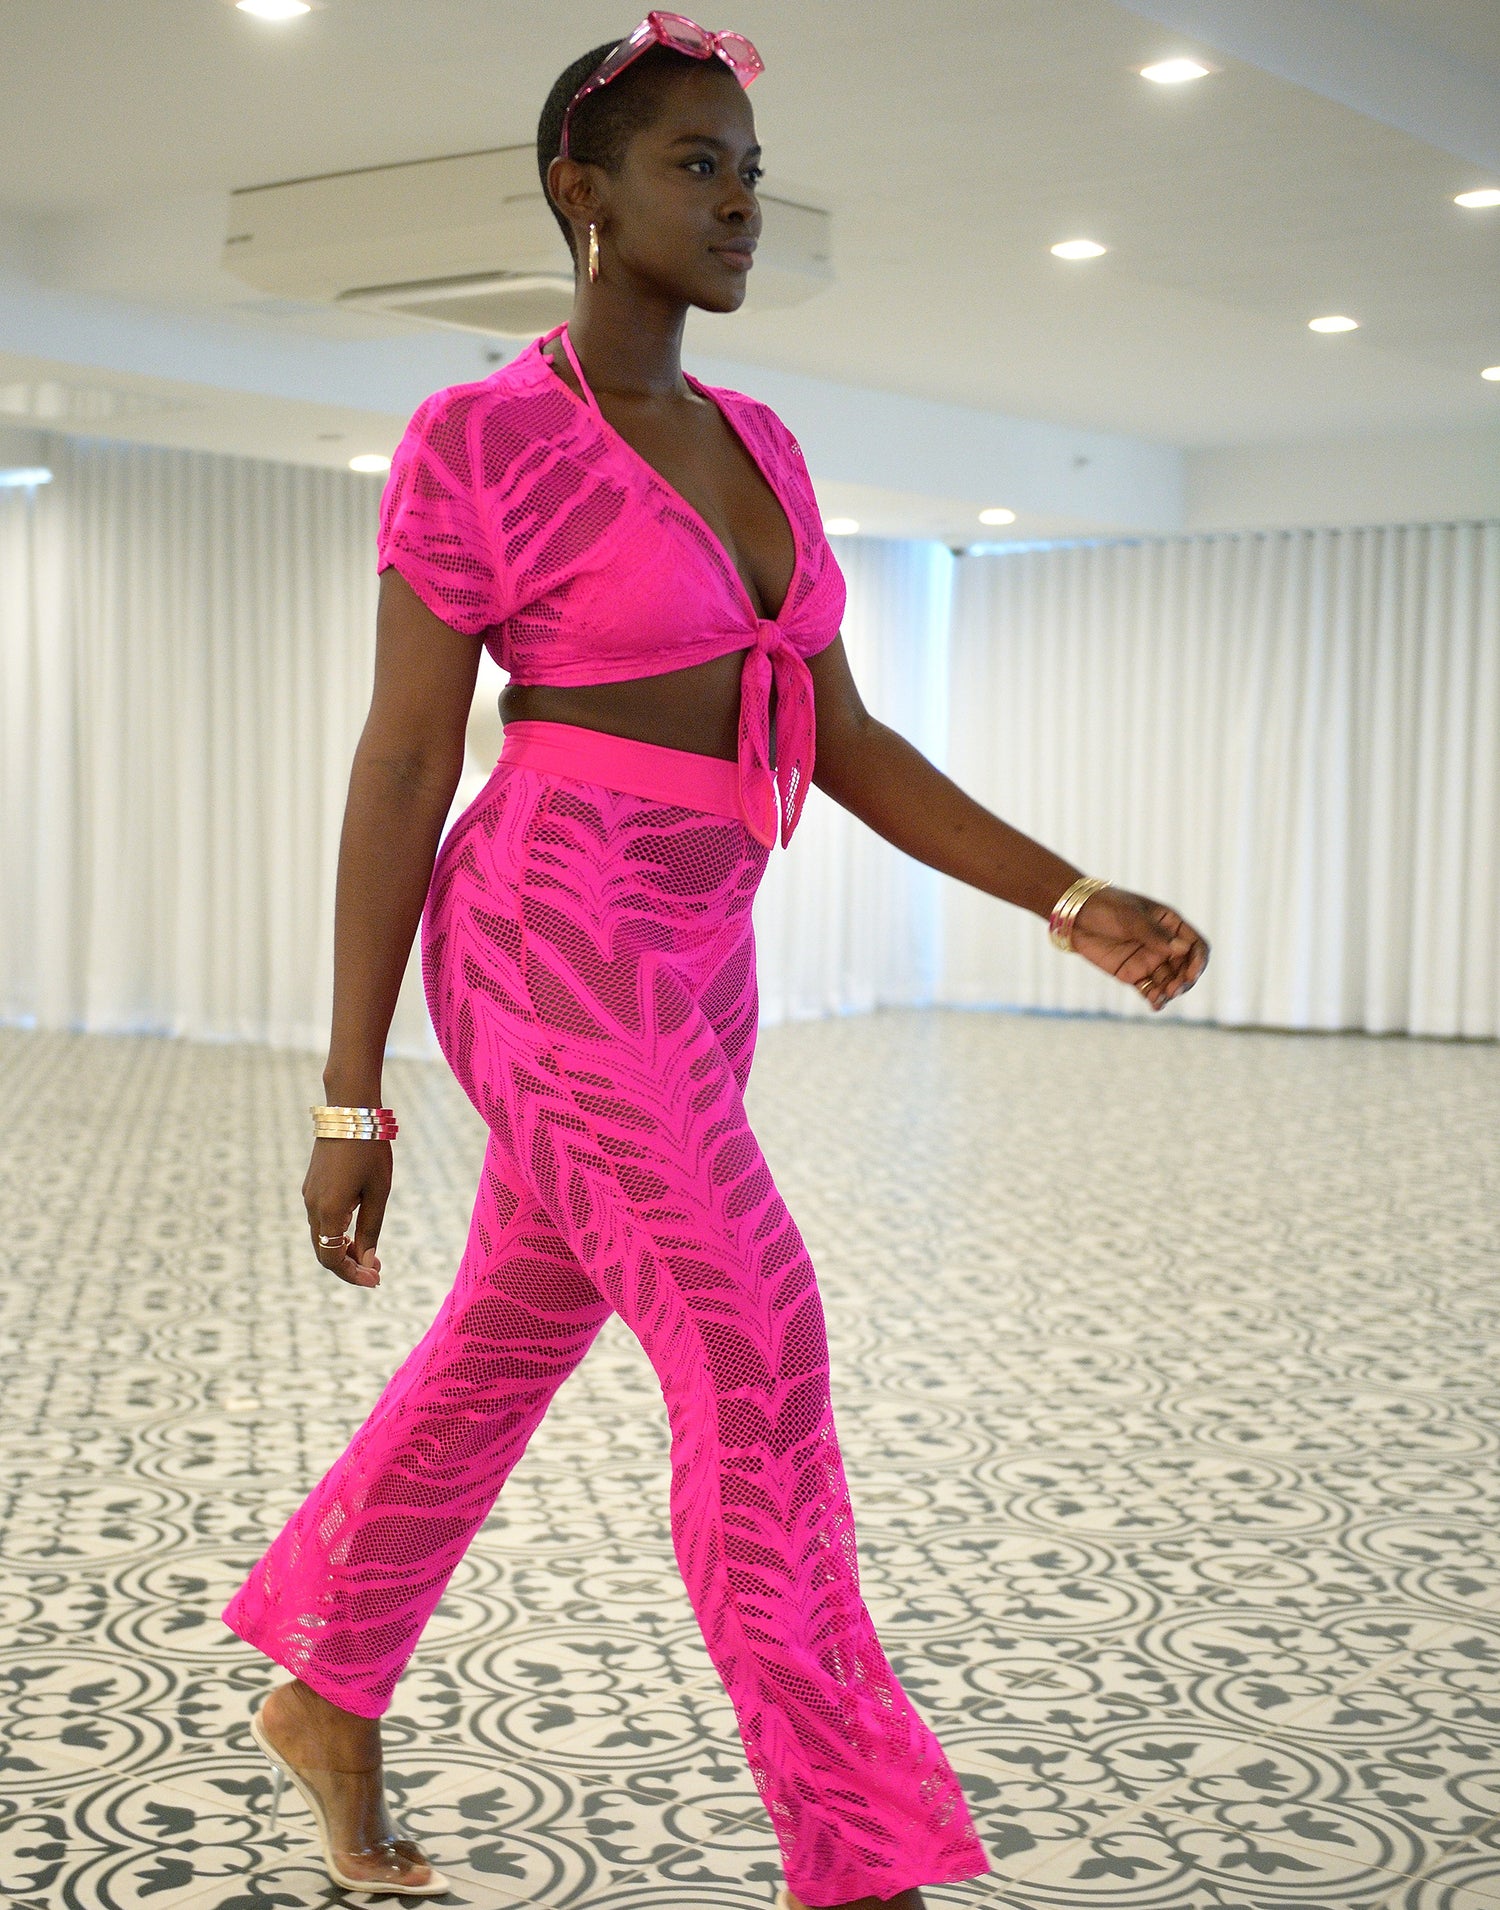 Miller Cover Up Pant in Neon Pink - Angled View / Summer 2021 Miami Runway Show 